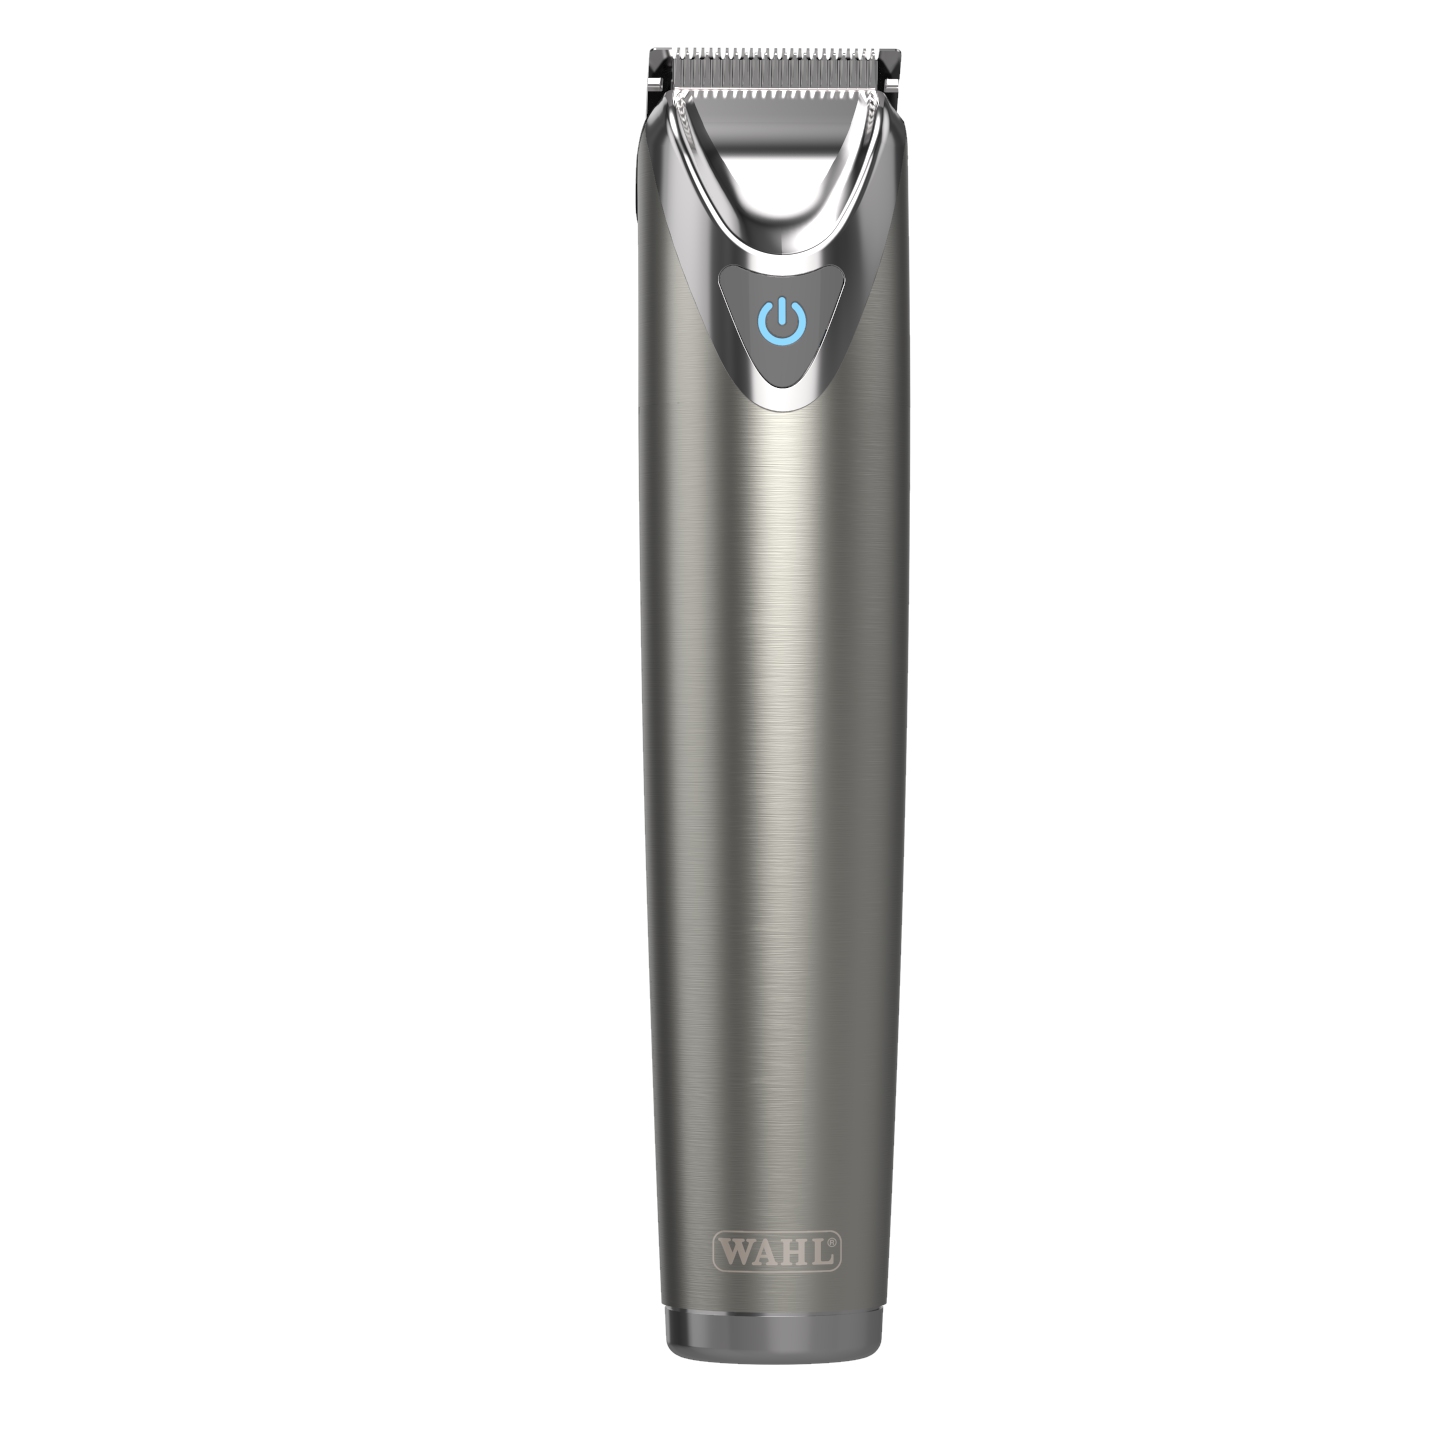 wahl groomsman rechargeable trimmer